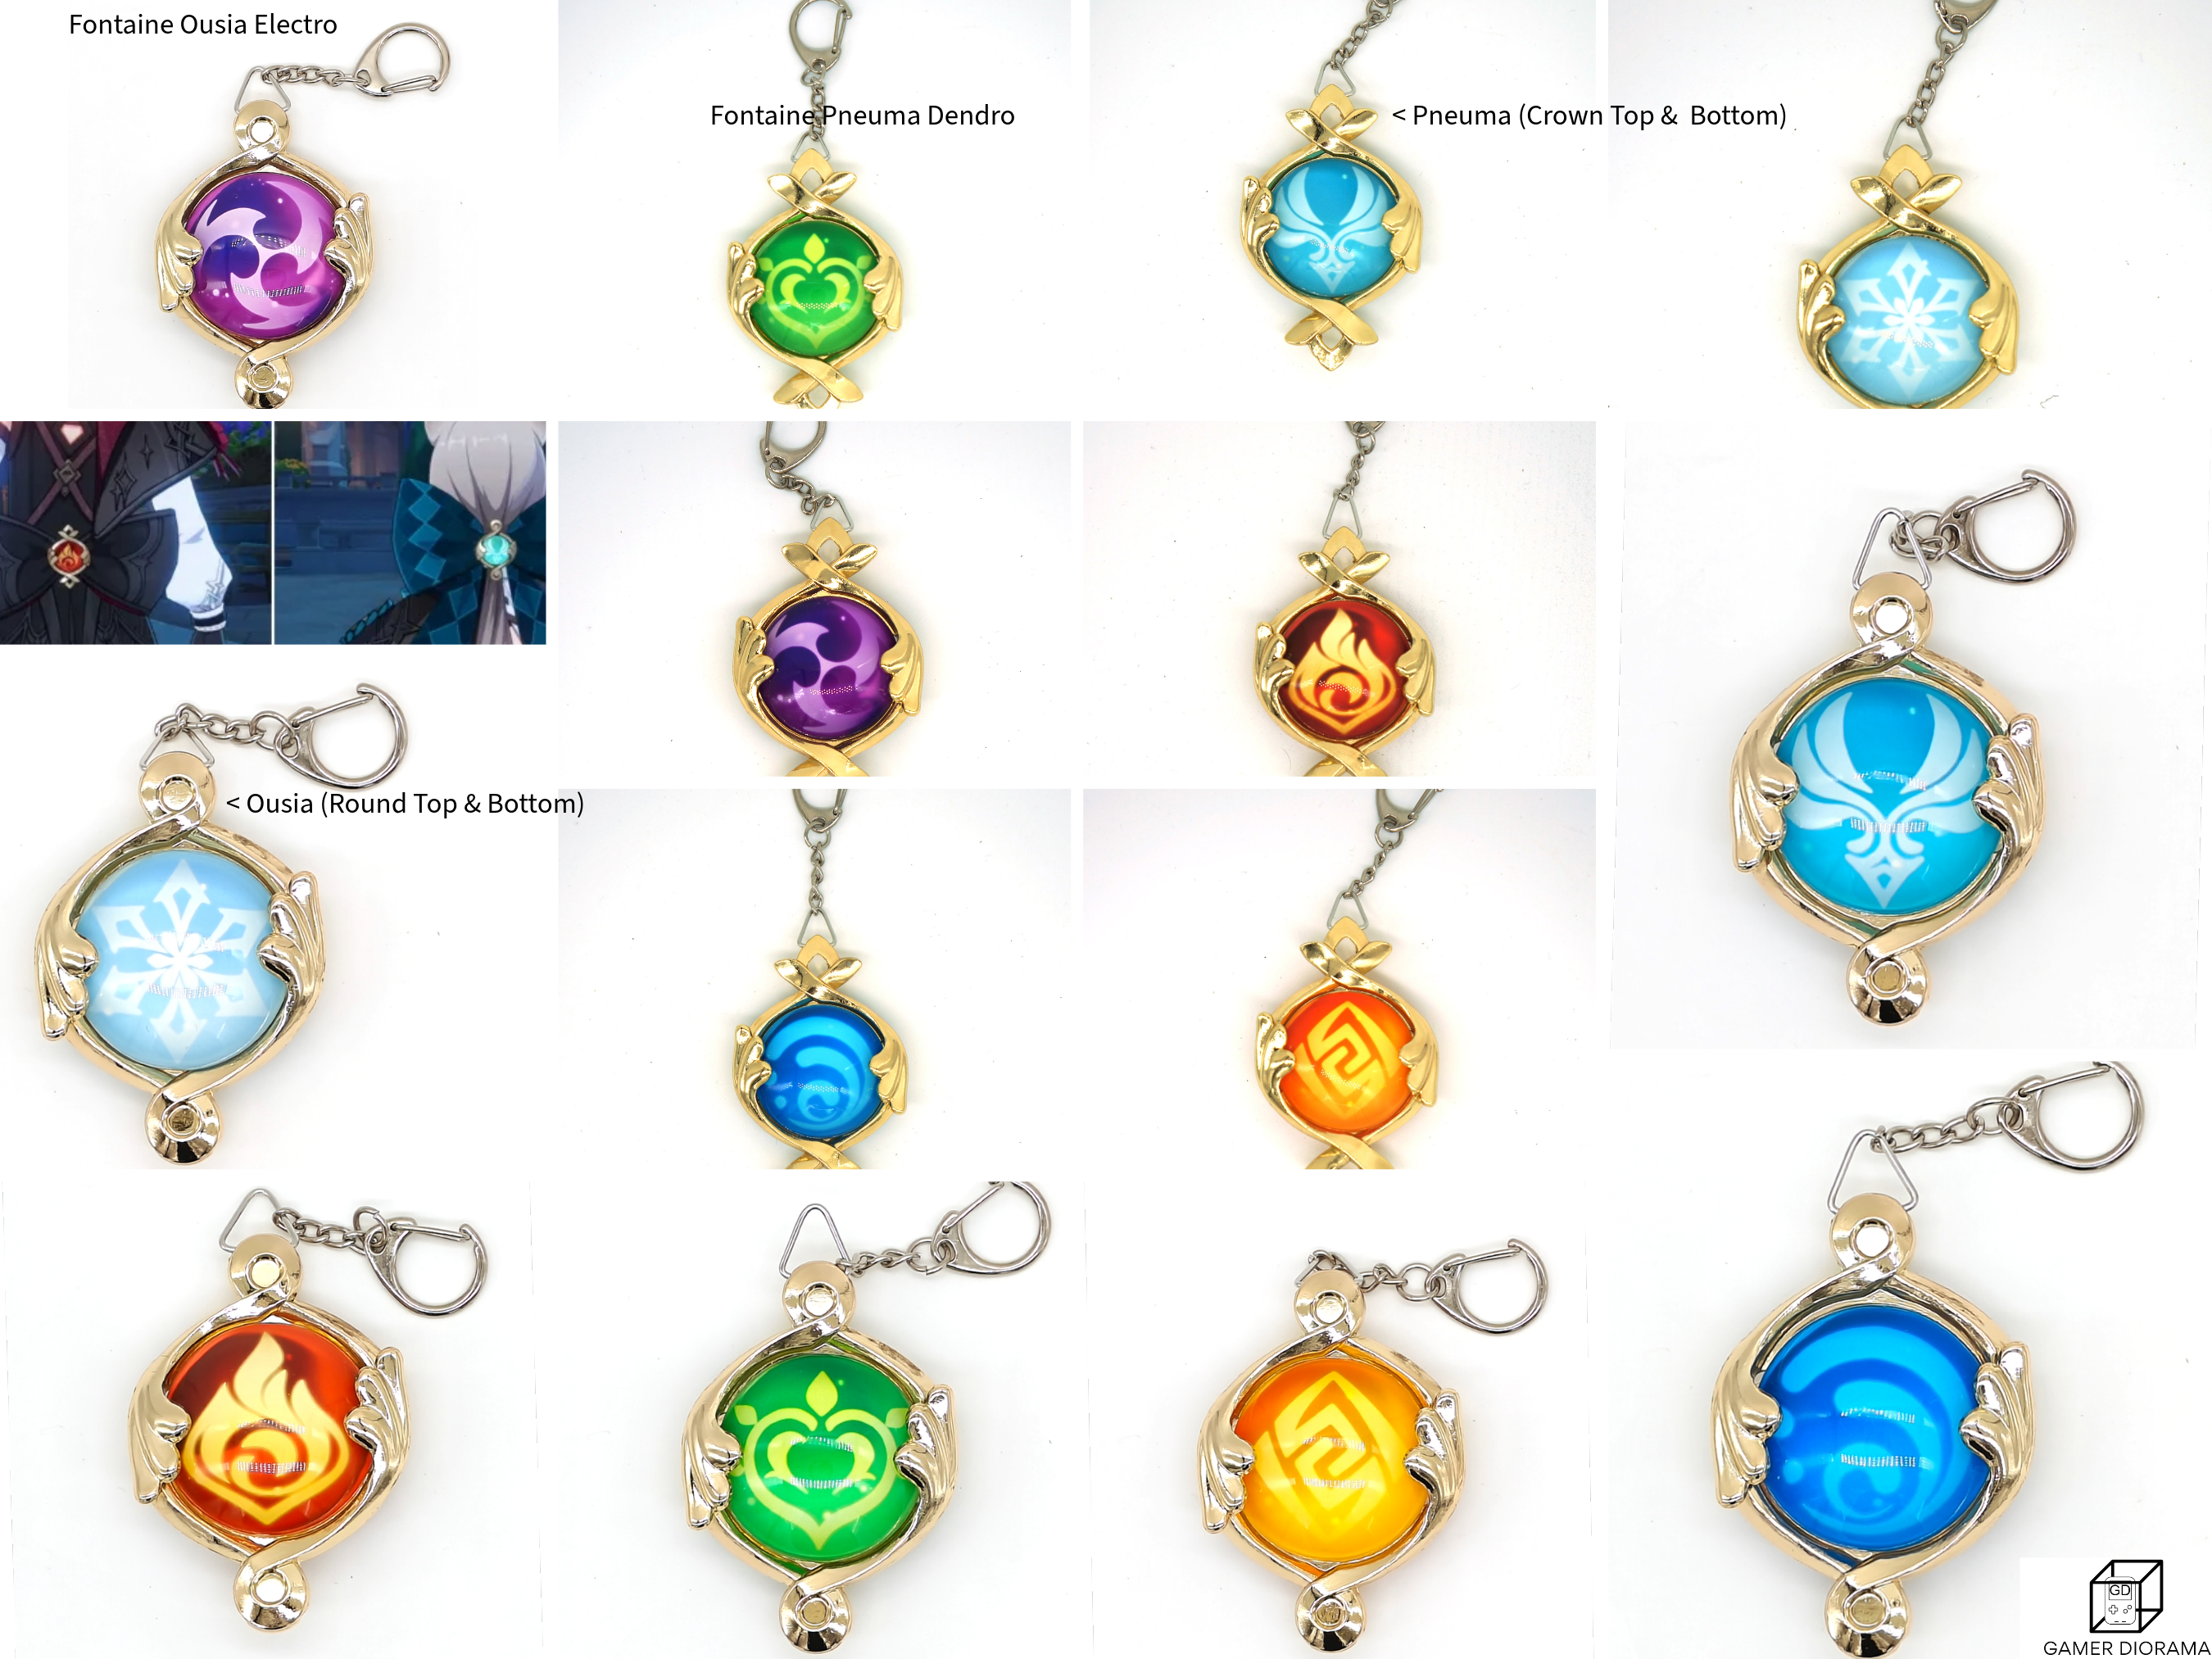 Amazon HANDMADE Personalized High-Quality Genshin Impact Visions with metal Keychain, Glass Vision, Gifts for Her, Gift for Him